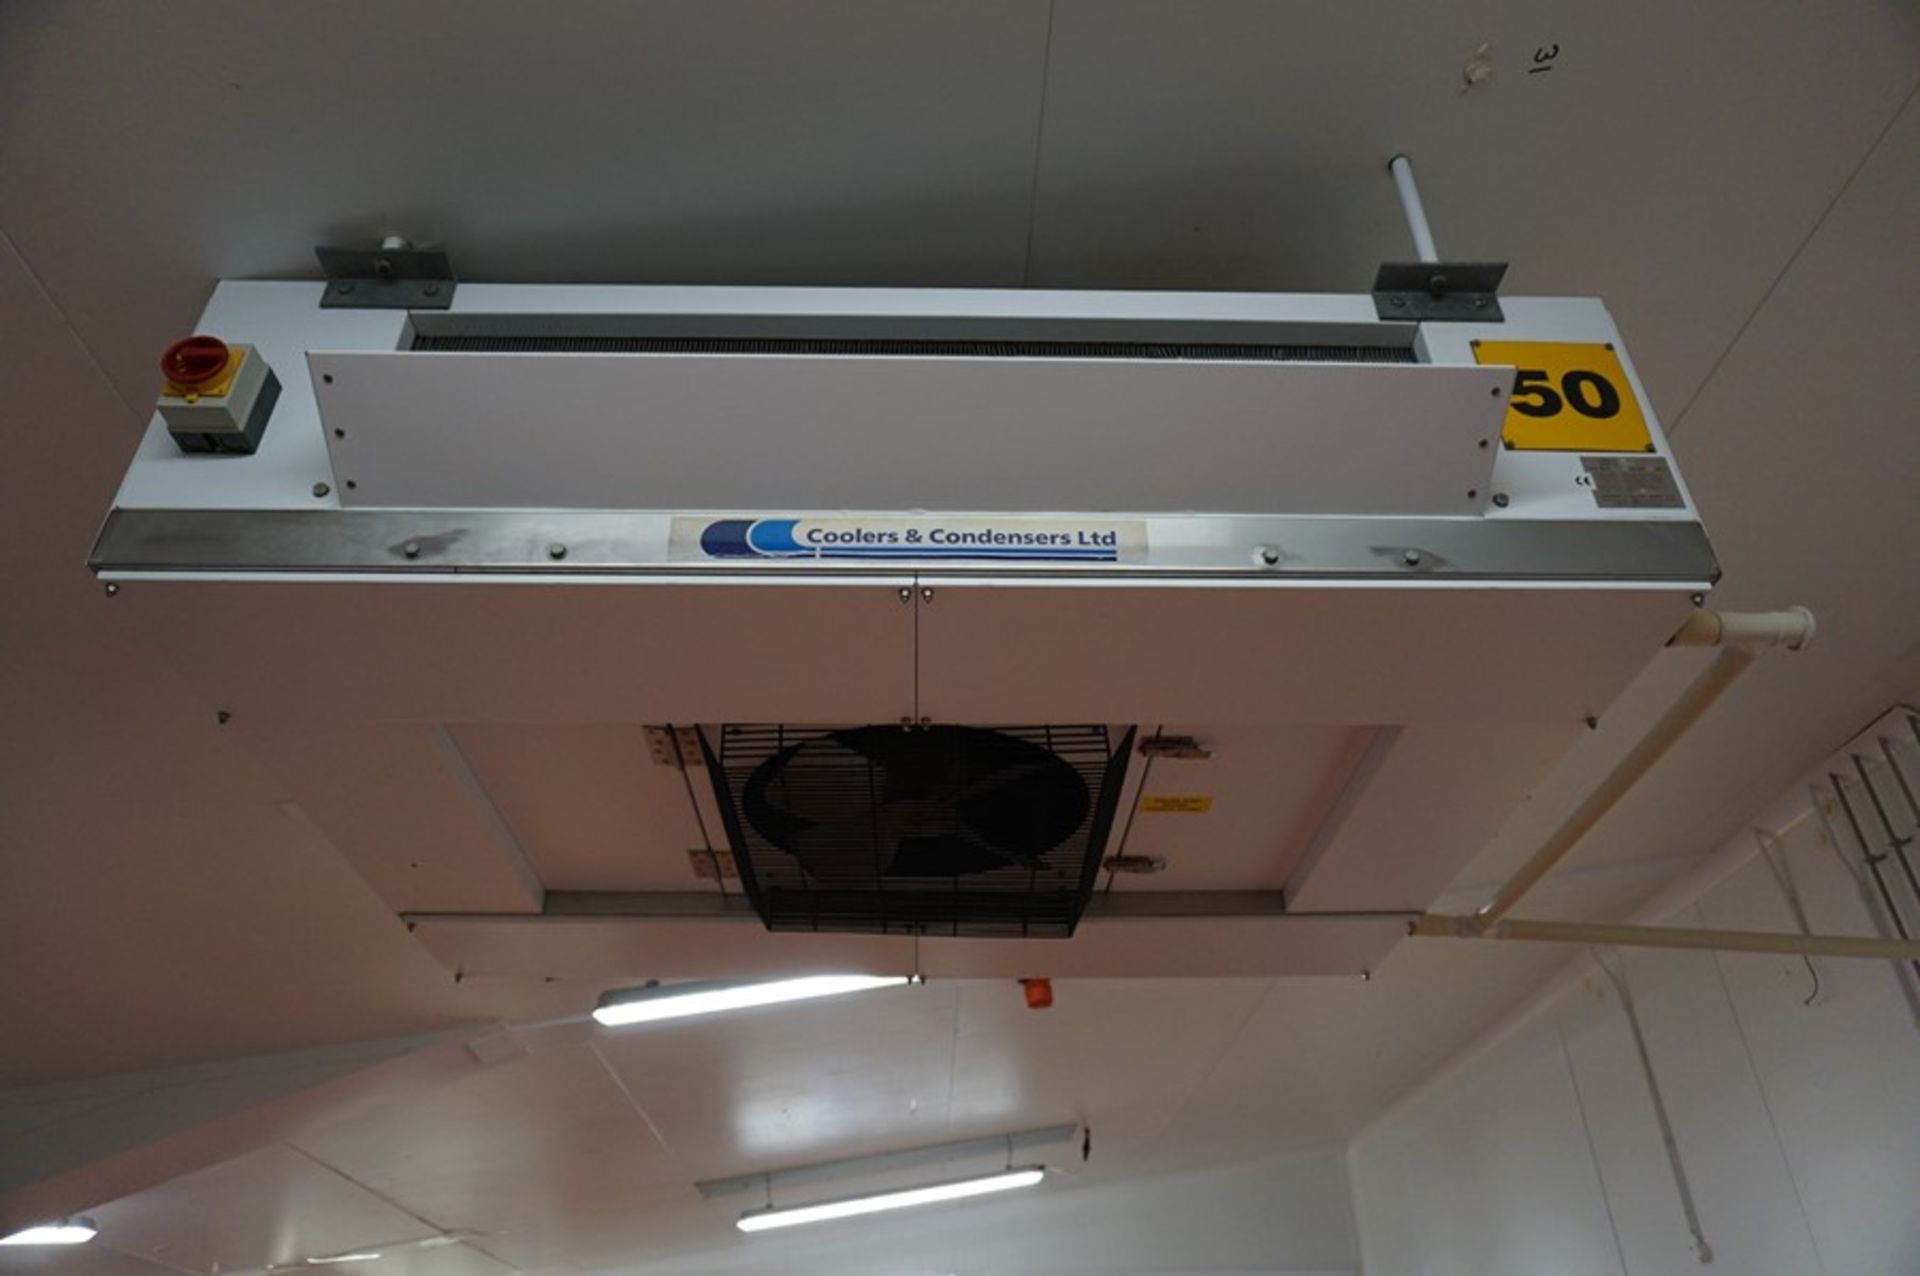 Coolers & Condensers, Model: DAQ2, single fan chiller unit, Serial No. 12000 (2000) (Lift out charge - Image 2 of 2